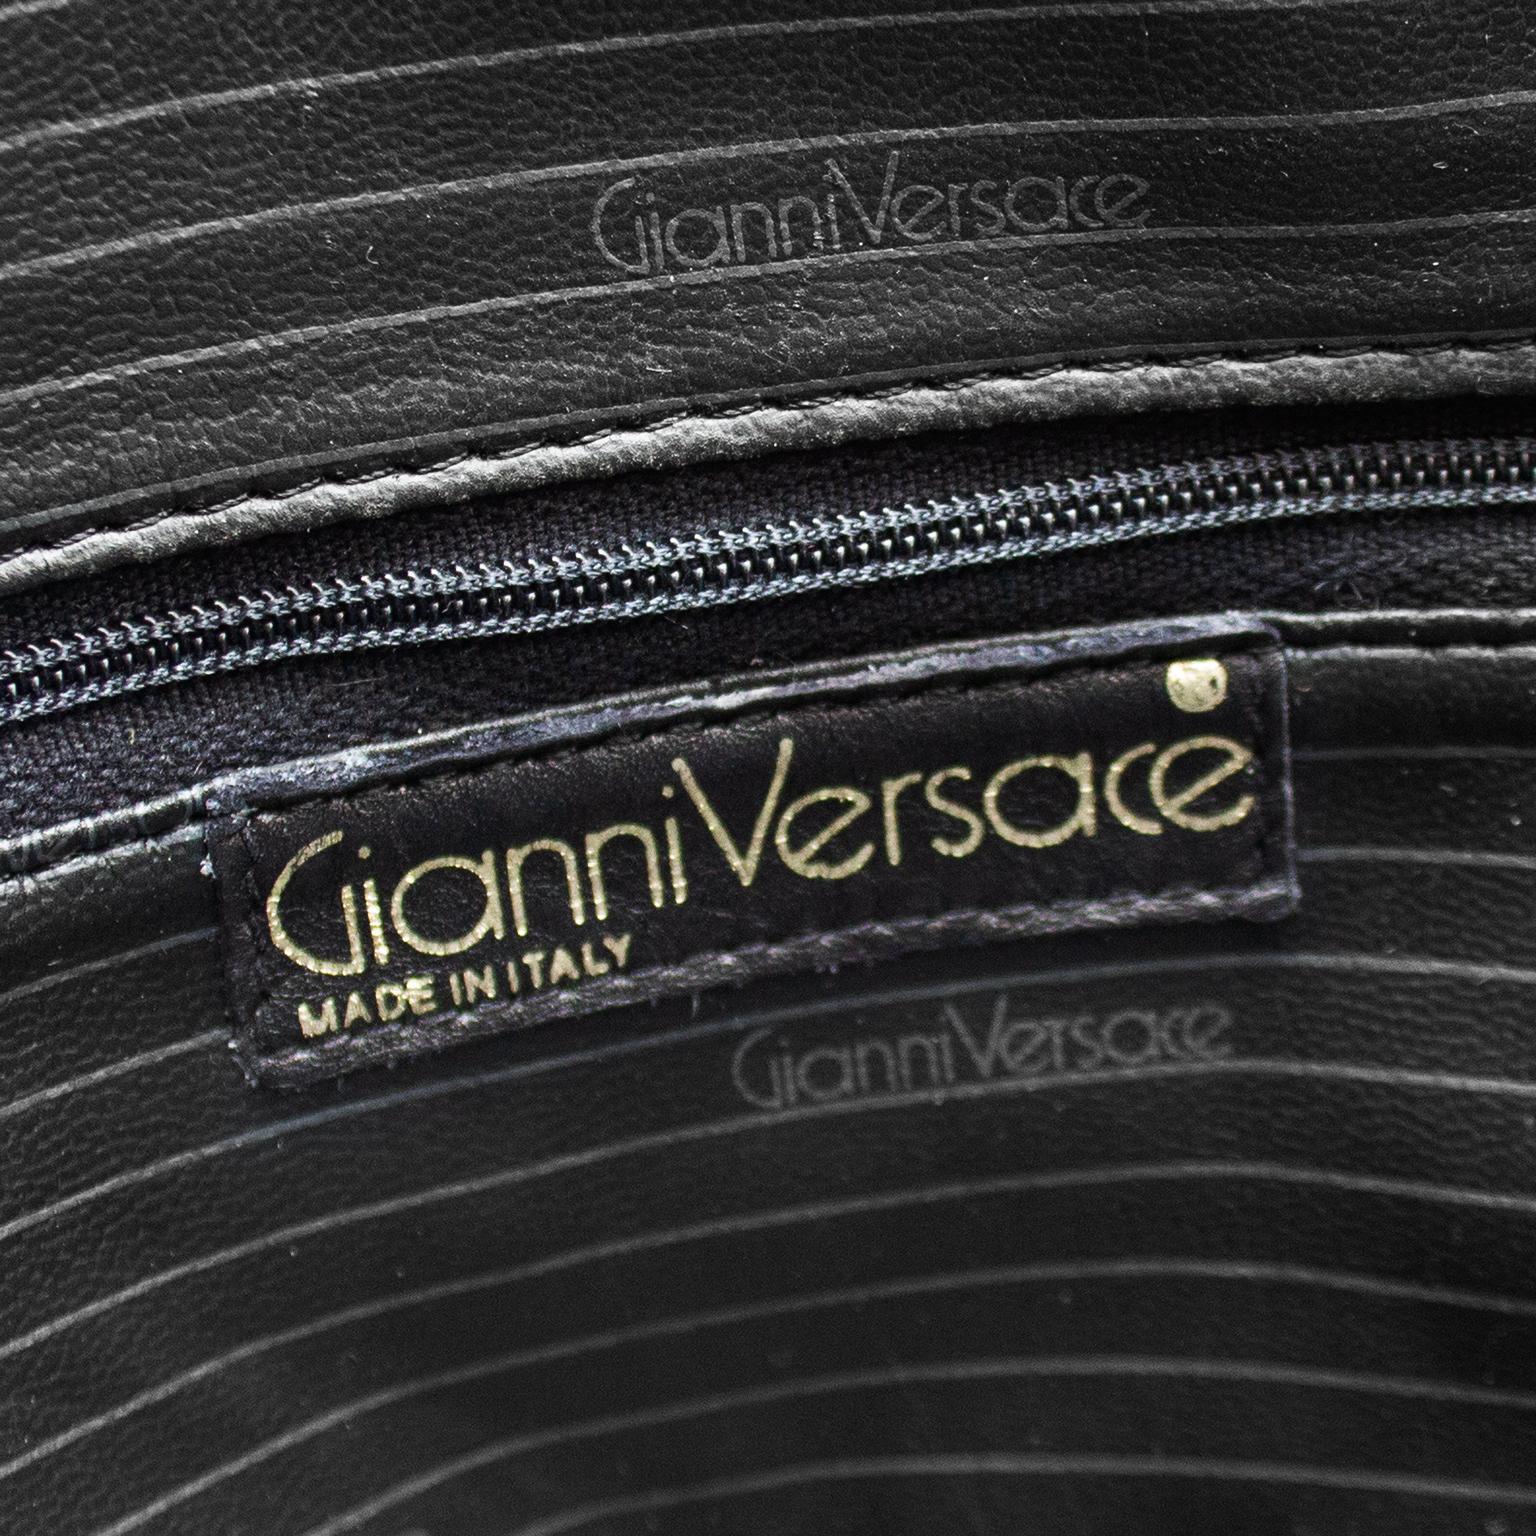 1990s Gianni Versace Black Leather Tote Bag with Zipper Details  For Sale 1